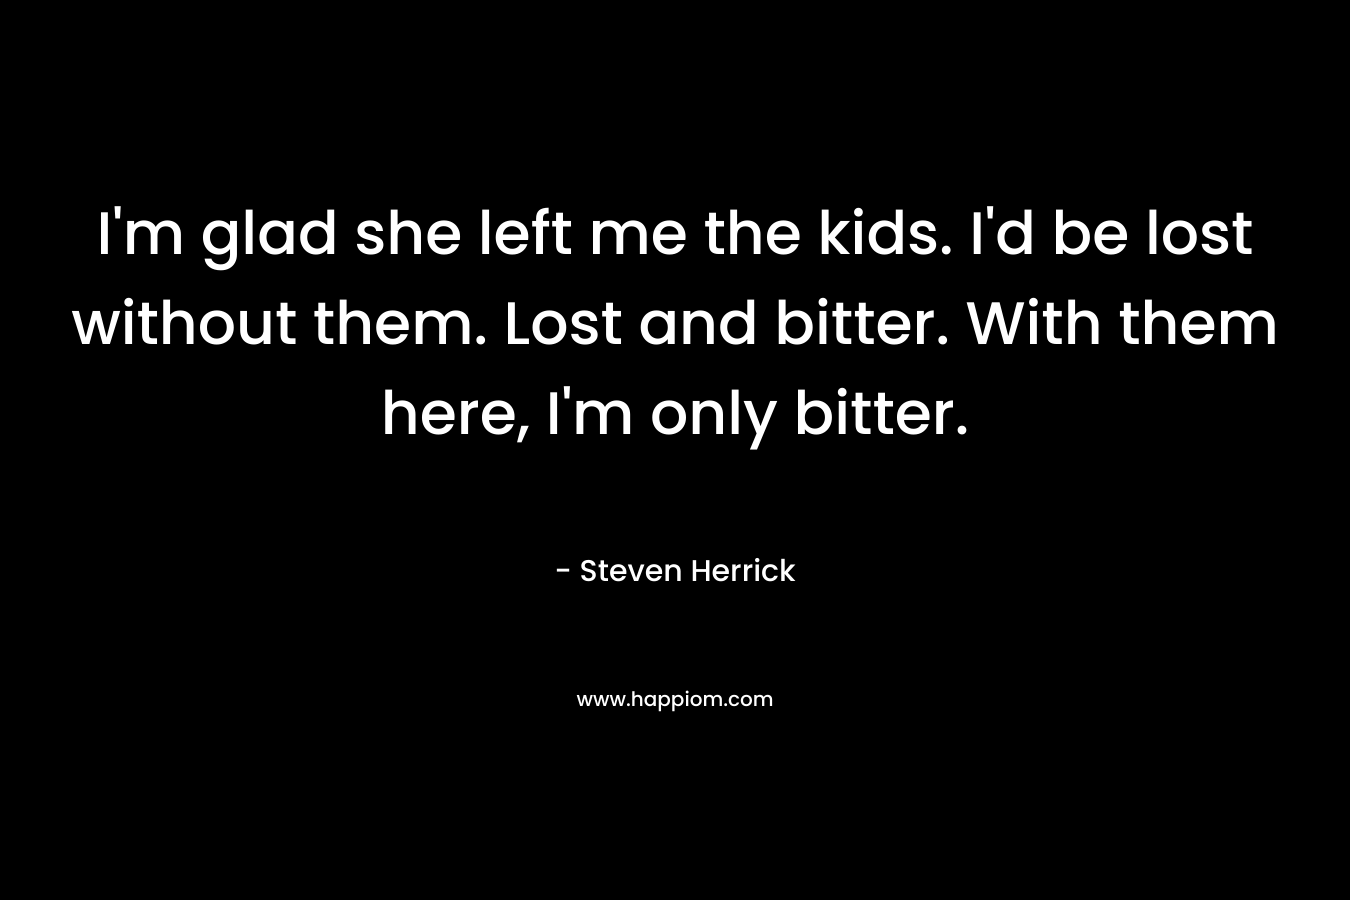 I’m glad she left me the kids. I’d be lost without them. Lost and bitter. With them here, I’m only bitter. – Steven Herrick